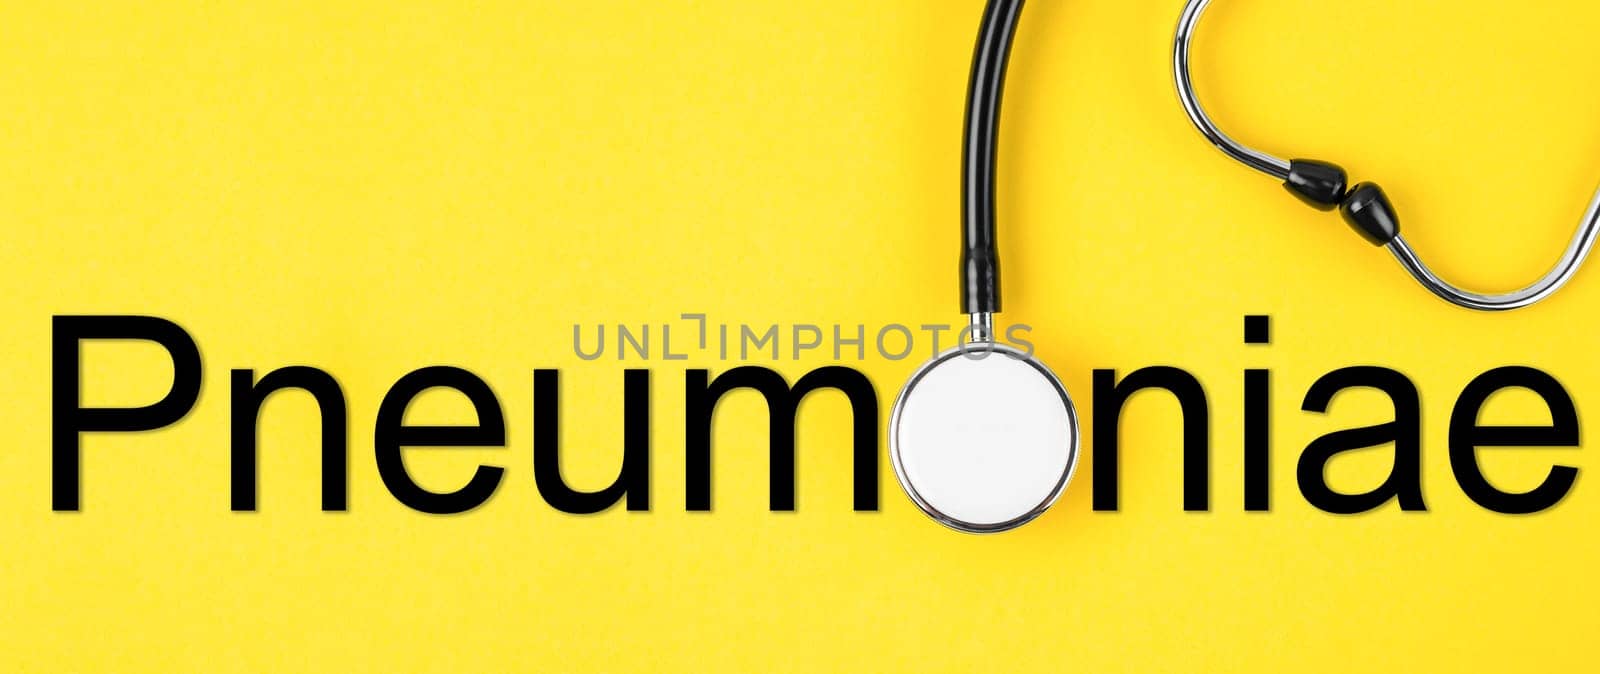 Pneumonia text and medical stethoscope on yellow background. Medcial and healthcare concepts.